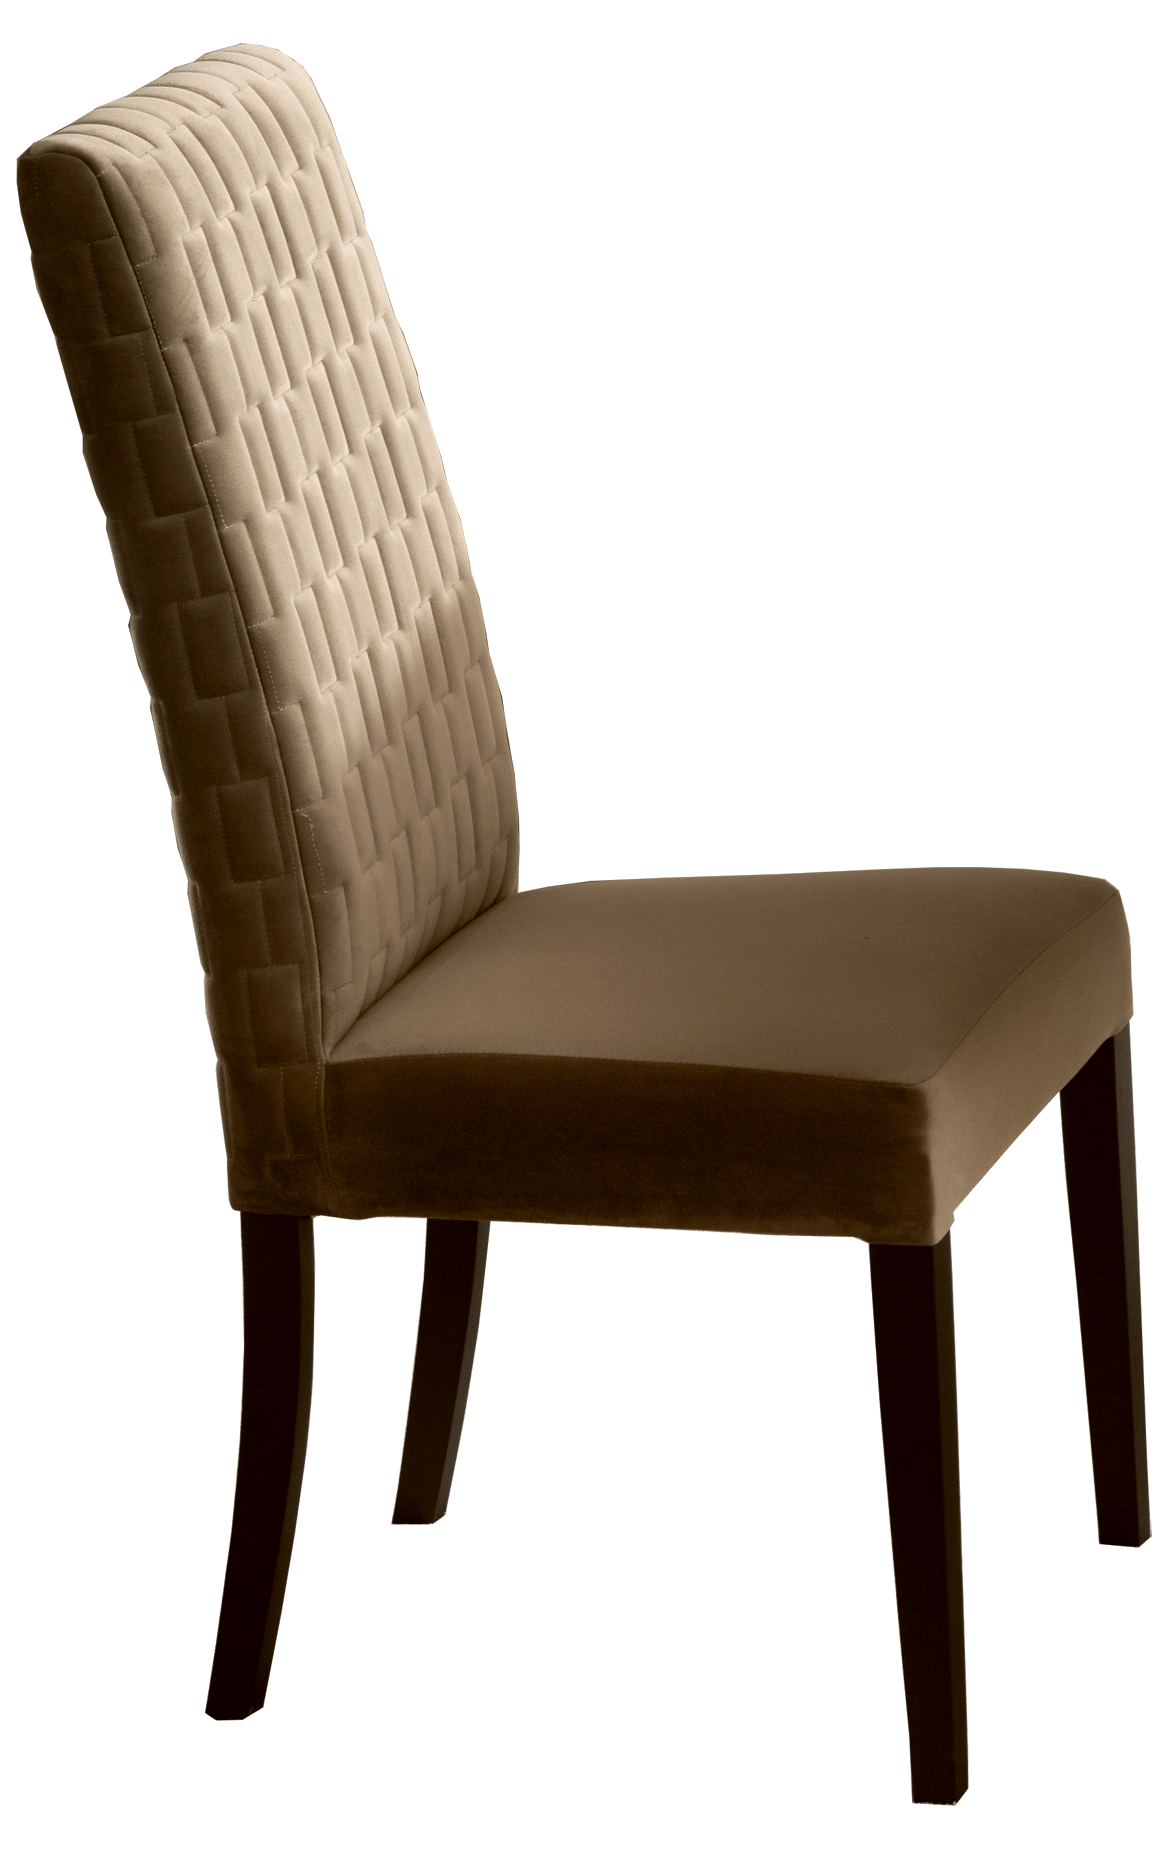 Brands Camel Gold Collection, Italy Poesia Dining Chair by Arredoclassic